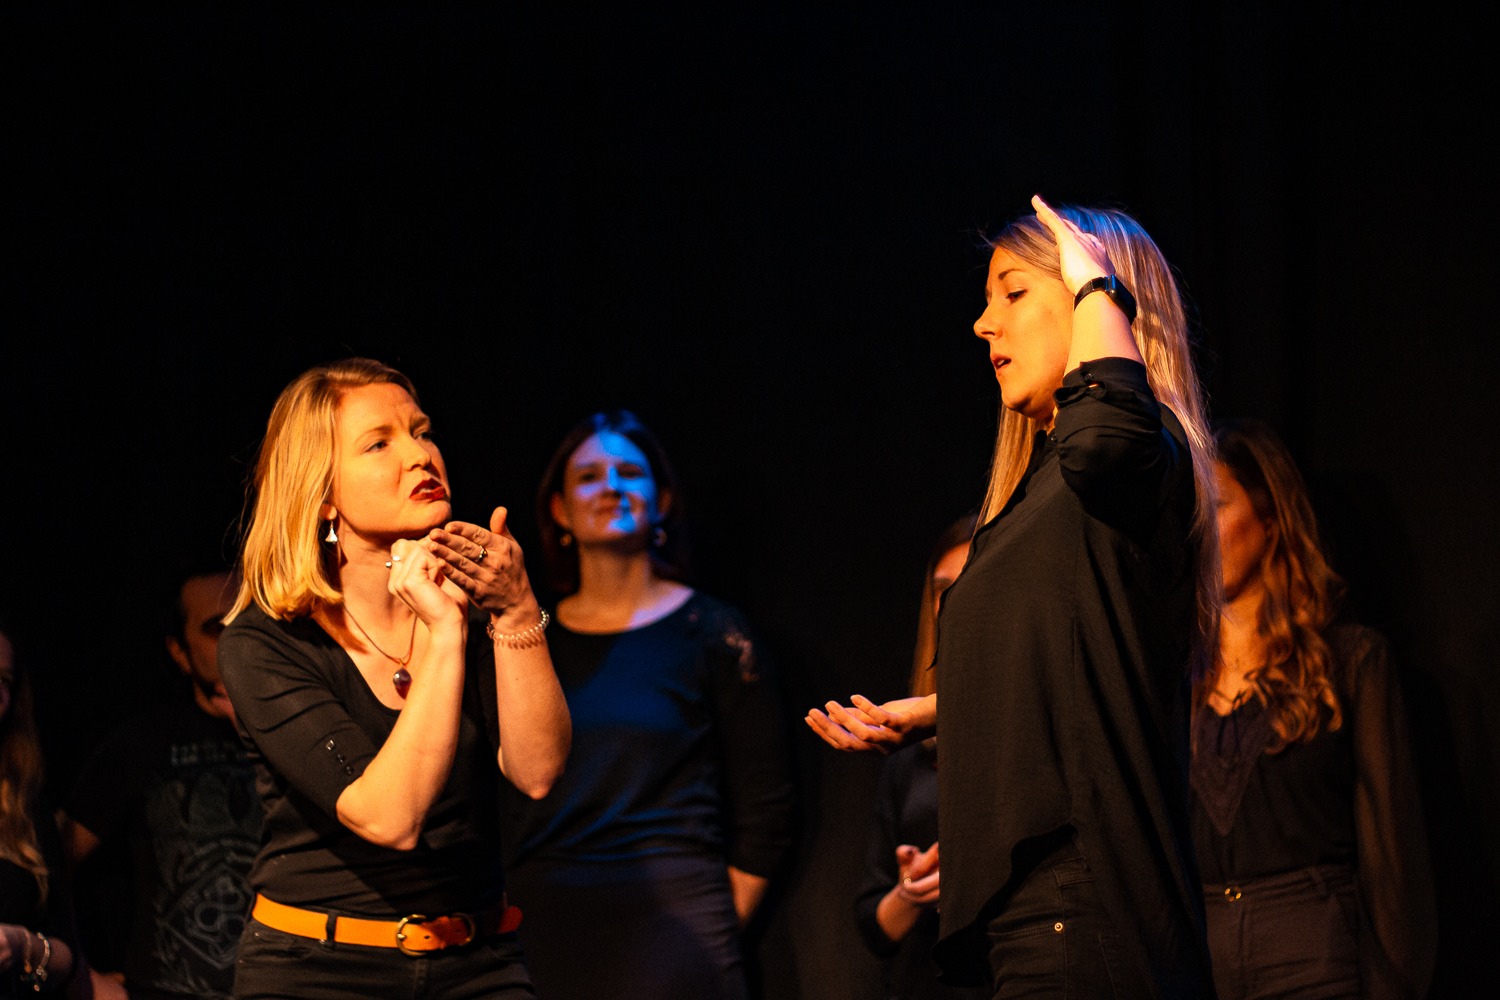 Act Attack's improv and physical show. A group of people on stage wearing black. Two blonde women talking or gesturing